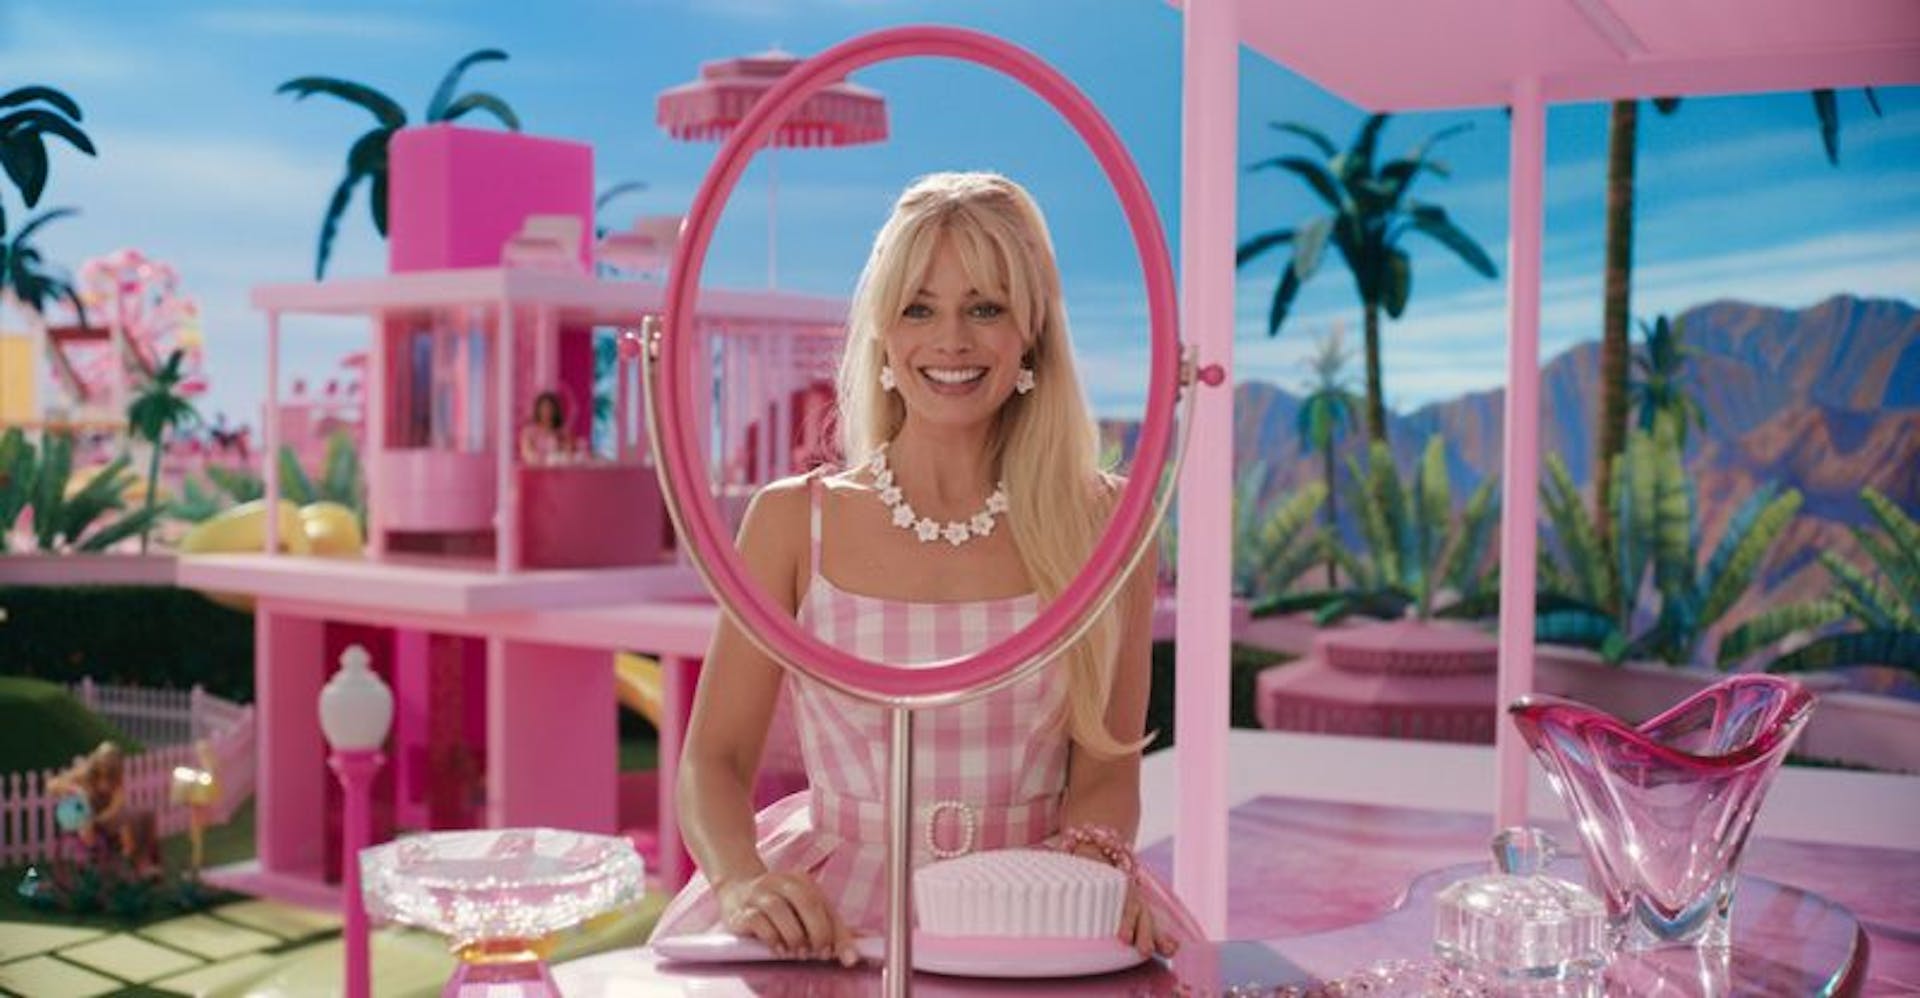 The marketing campaign for the Barbie movie has been a huge success.